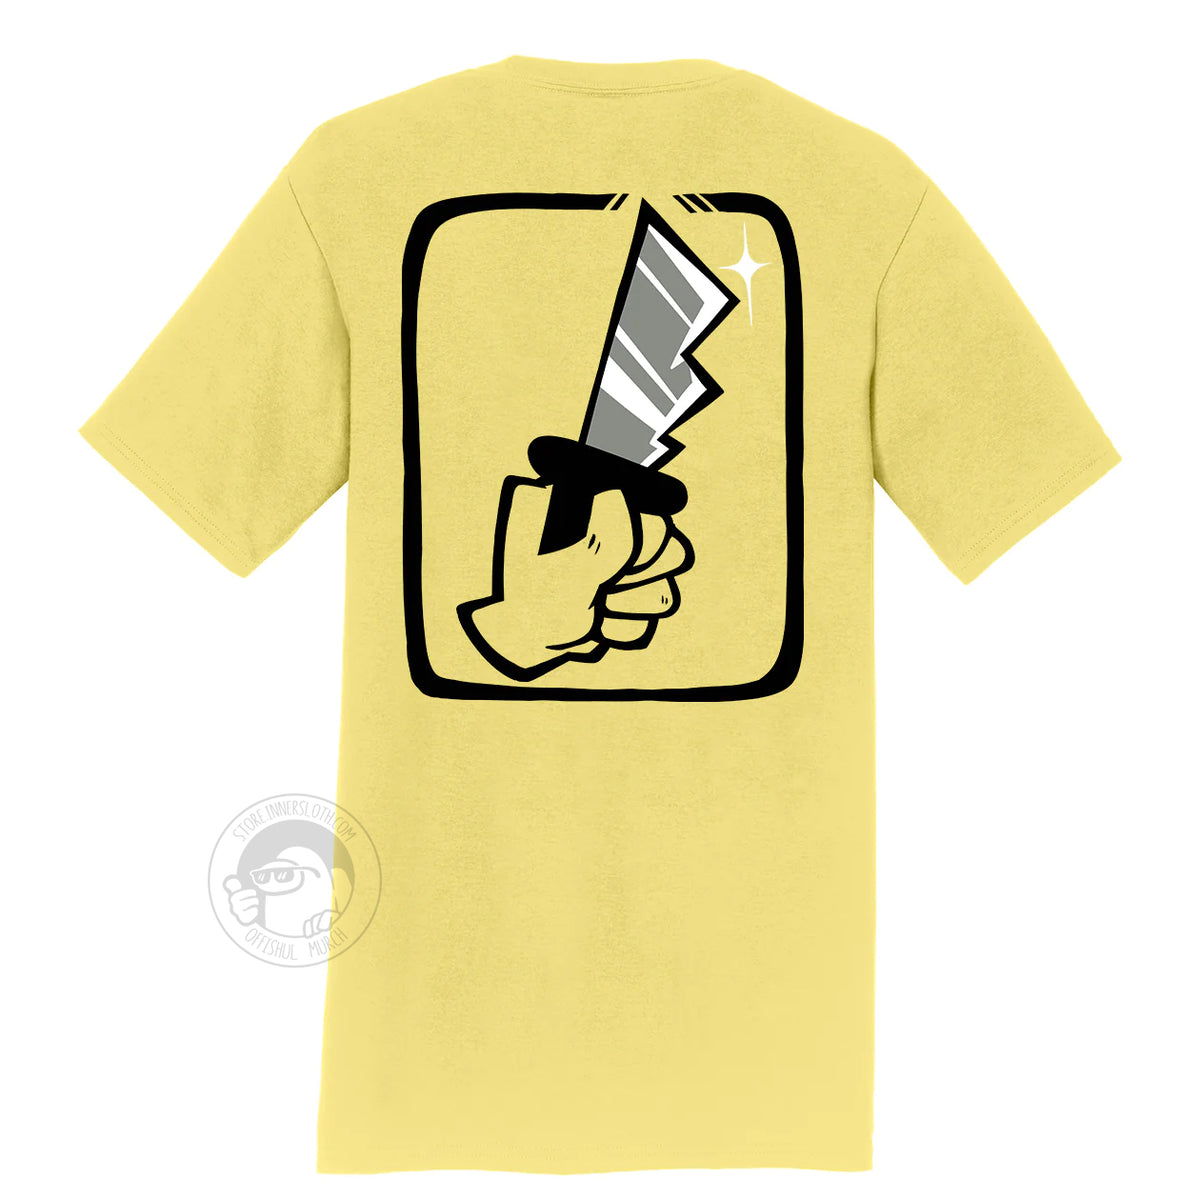 A product photo of the back of the Among Us: Shhhirt in yellow. The back art is a large hand holding a knife.